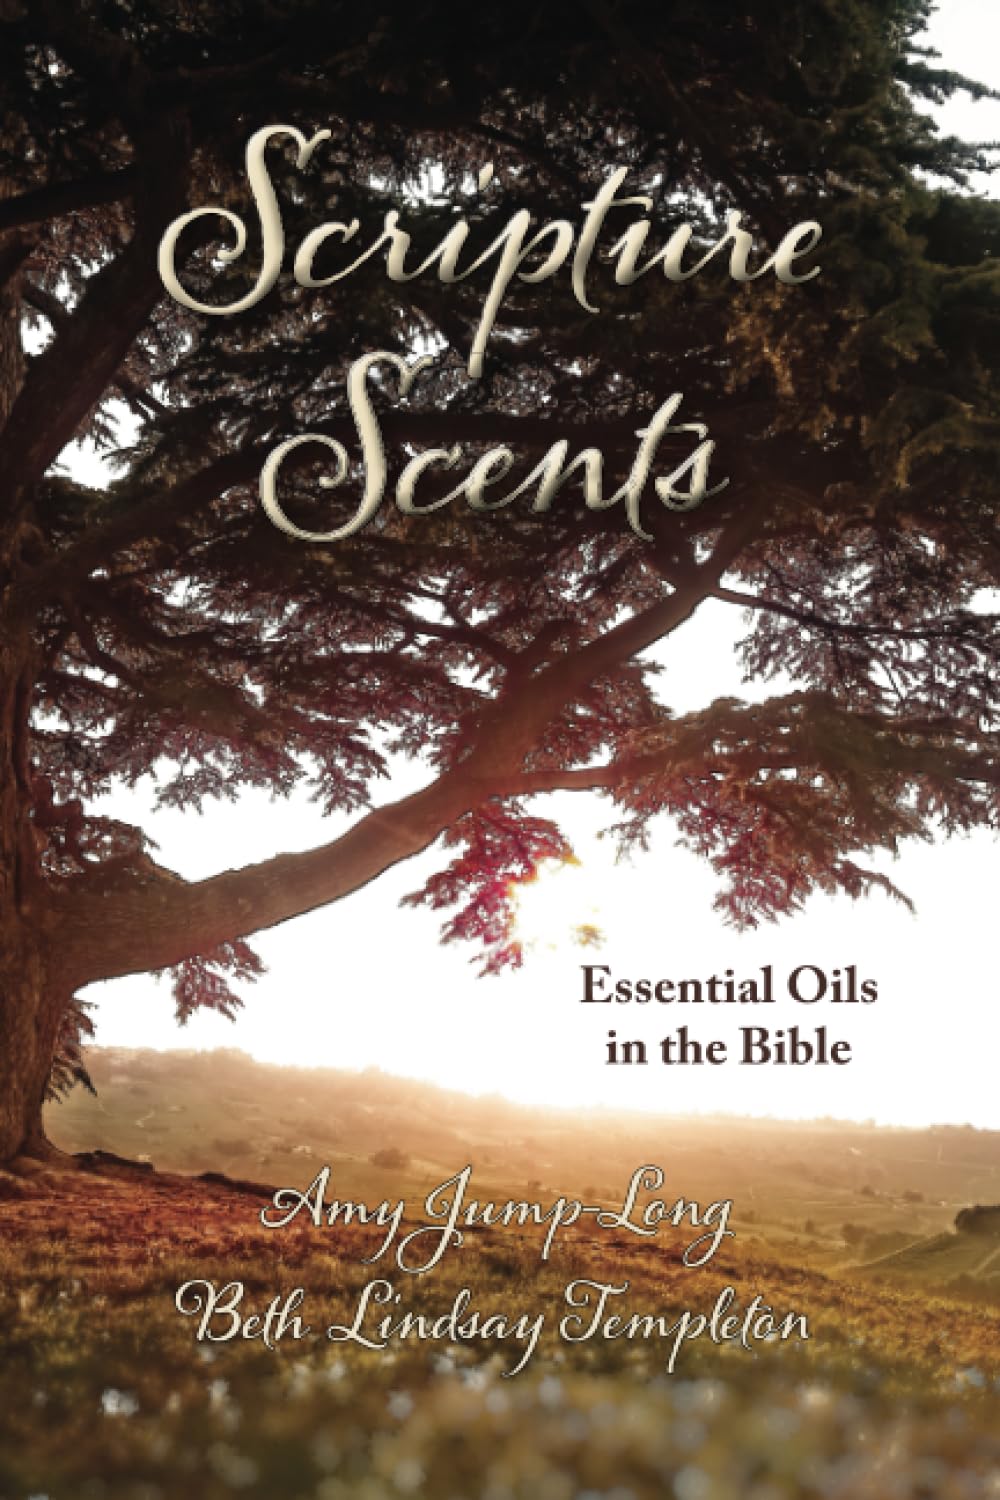 Scripture Scents: Essential Oils in the Bible